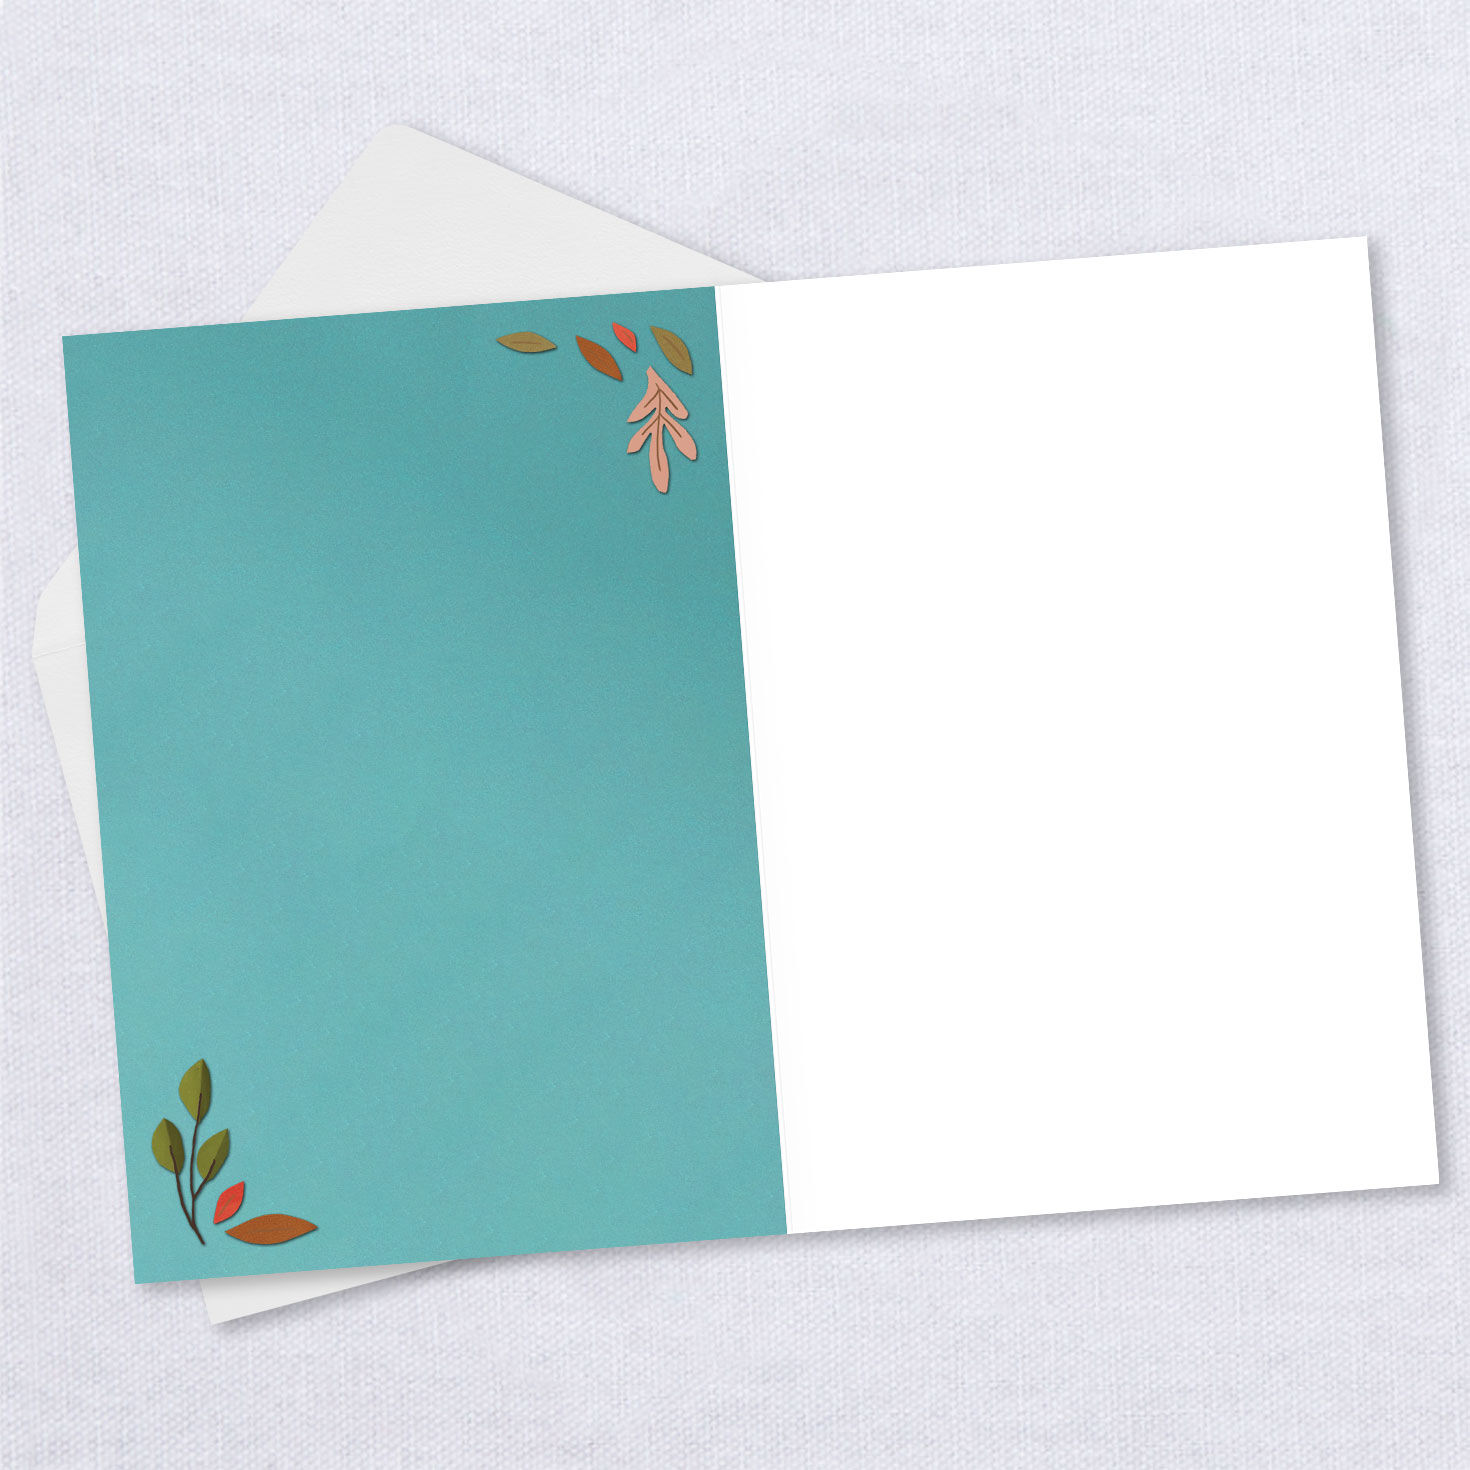 Greeting Cards for All Occasions | Buy Online | Hallmark